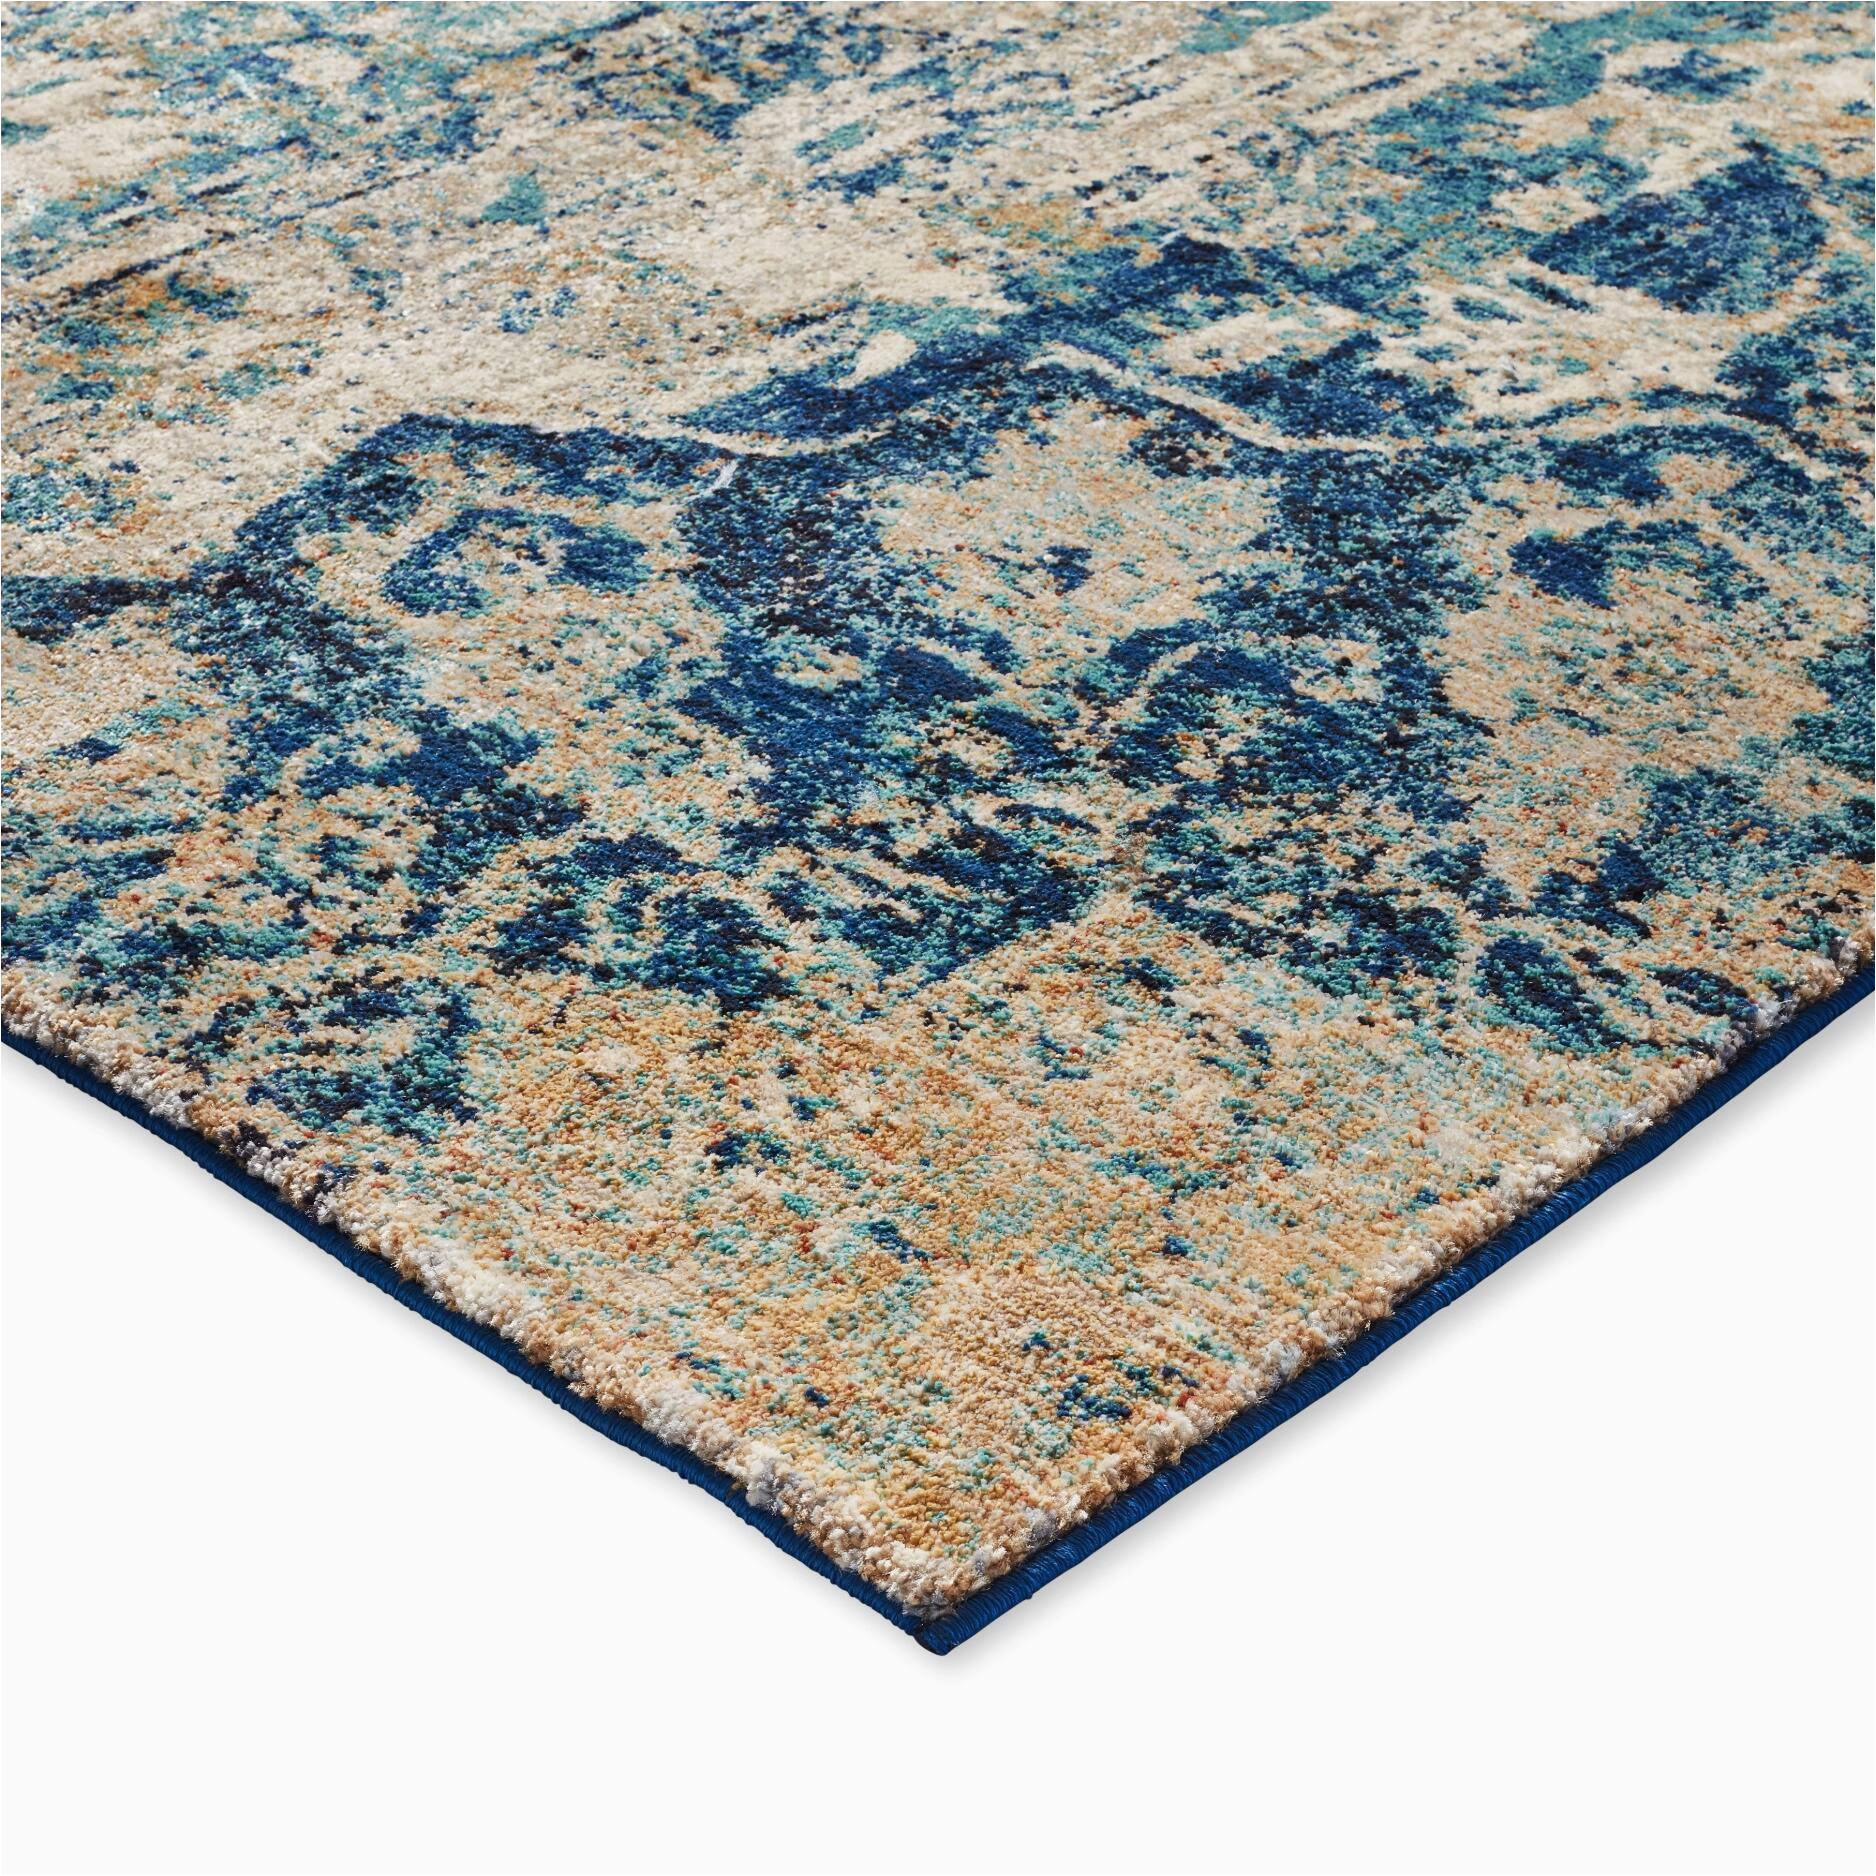 Best Price Large area Rugs Buy Oversized Large area Rugs Online at Overstock Com